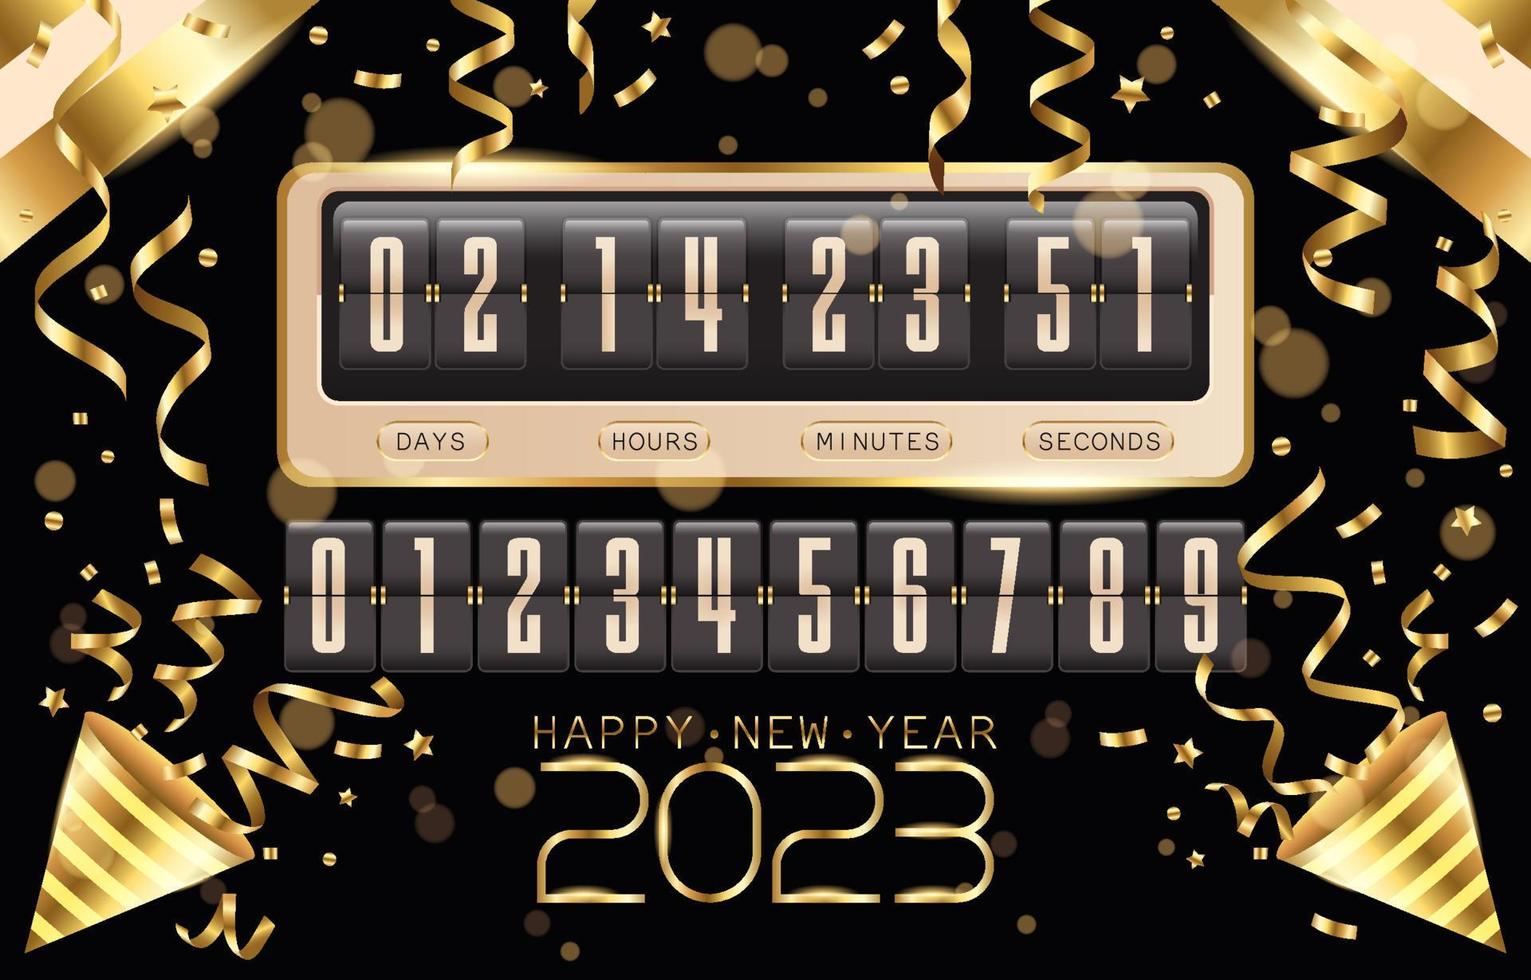 Gold Digital New Year Countdown Clock With Confetti vector